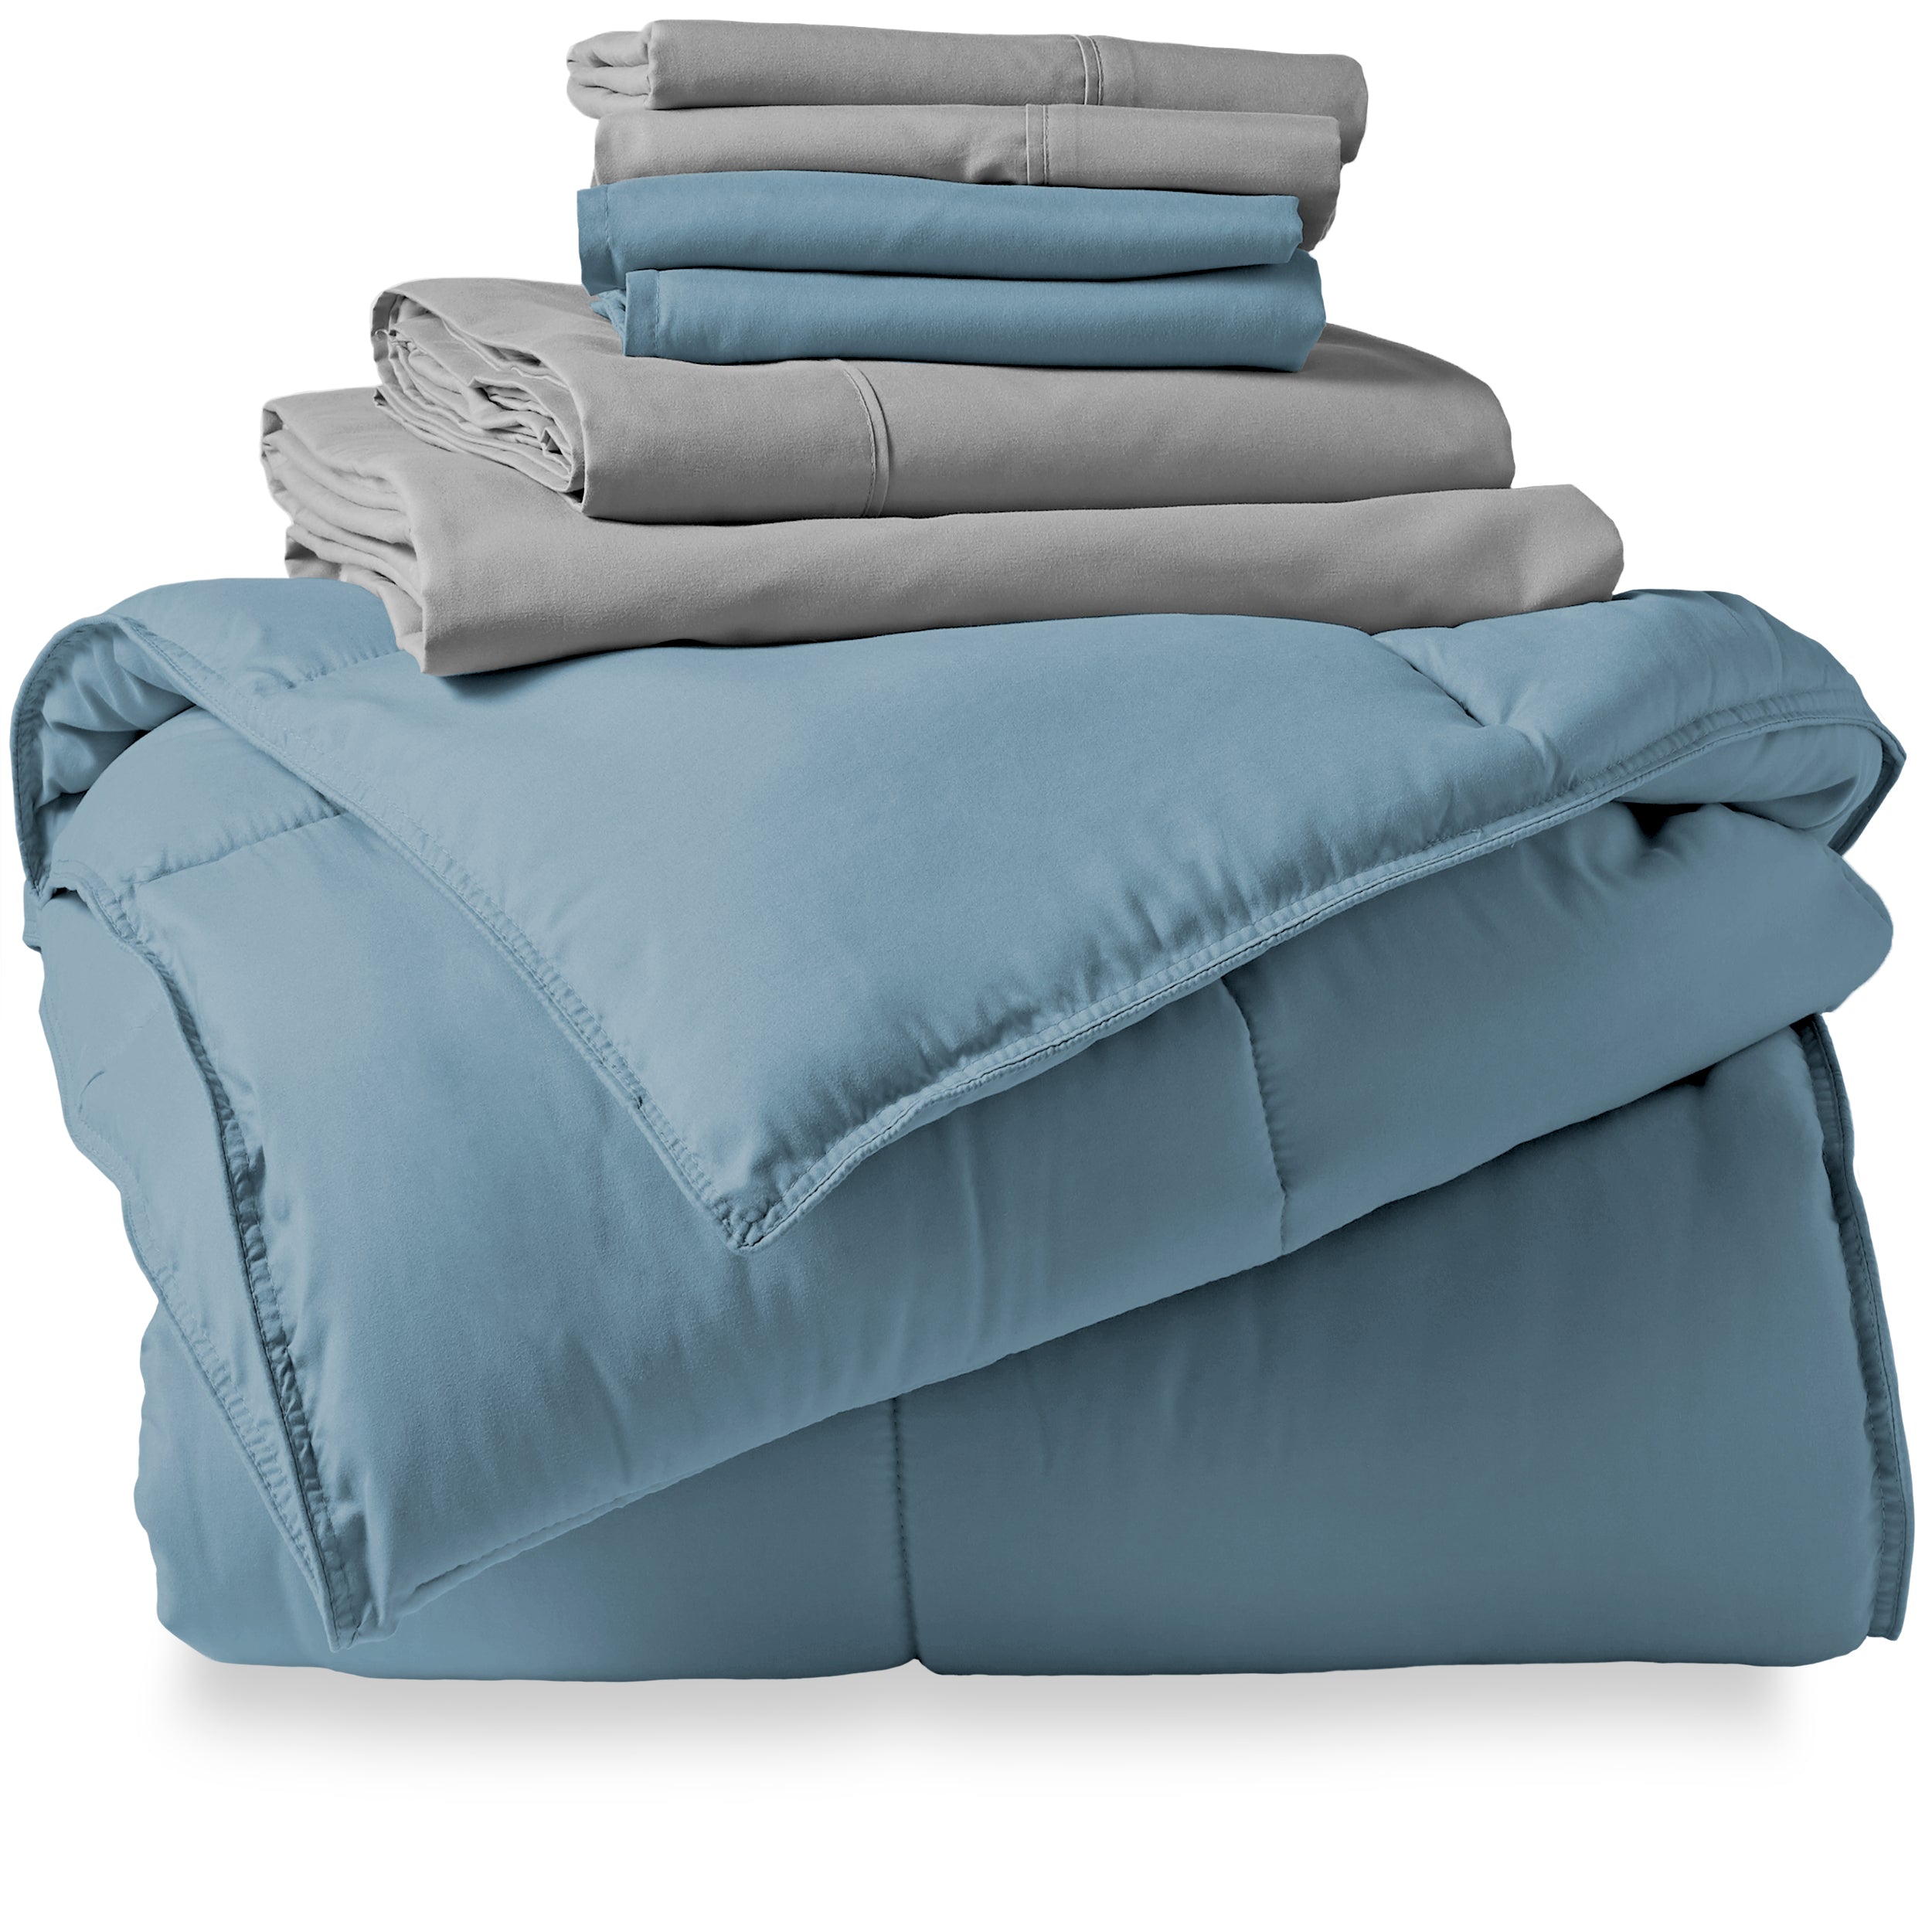 Coronet Blue Comforter Light Grey Sheets Bed-in-a-Bag